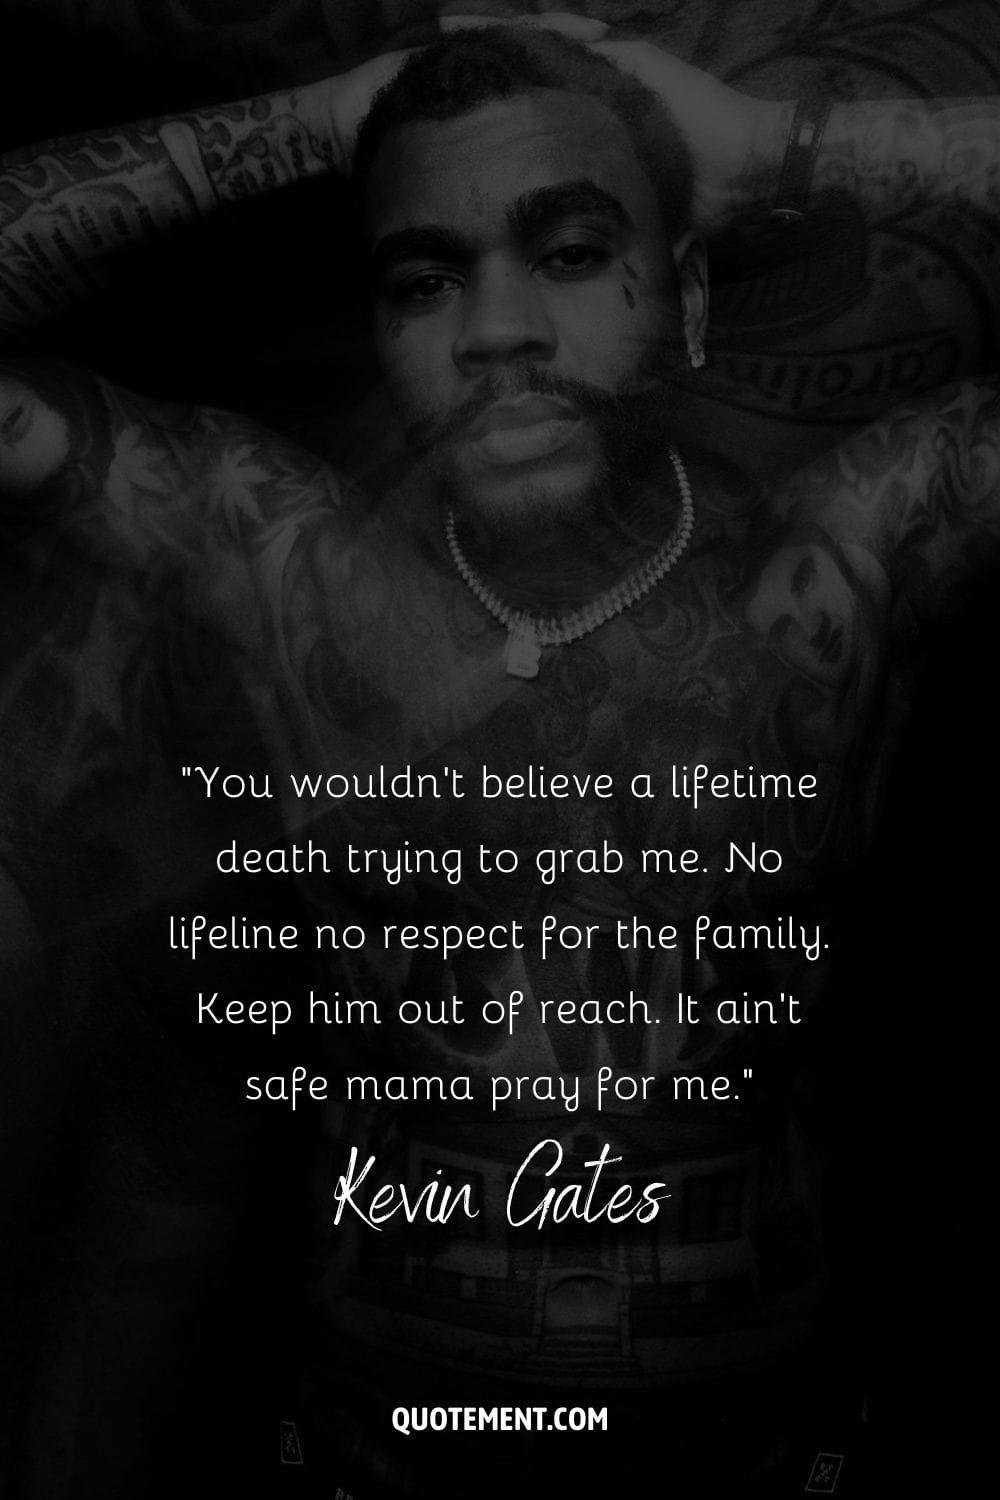 “You wouldn't believe a lifetime death trying to grab me. No lifeline no respect for the family. Keep him out of reach. It ain't safe mama pray for me.” – Kevin Gates